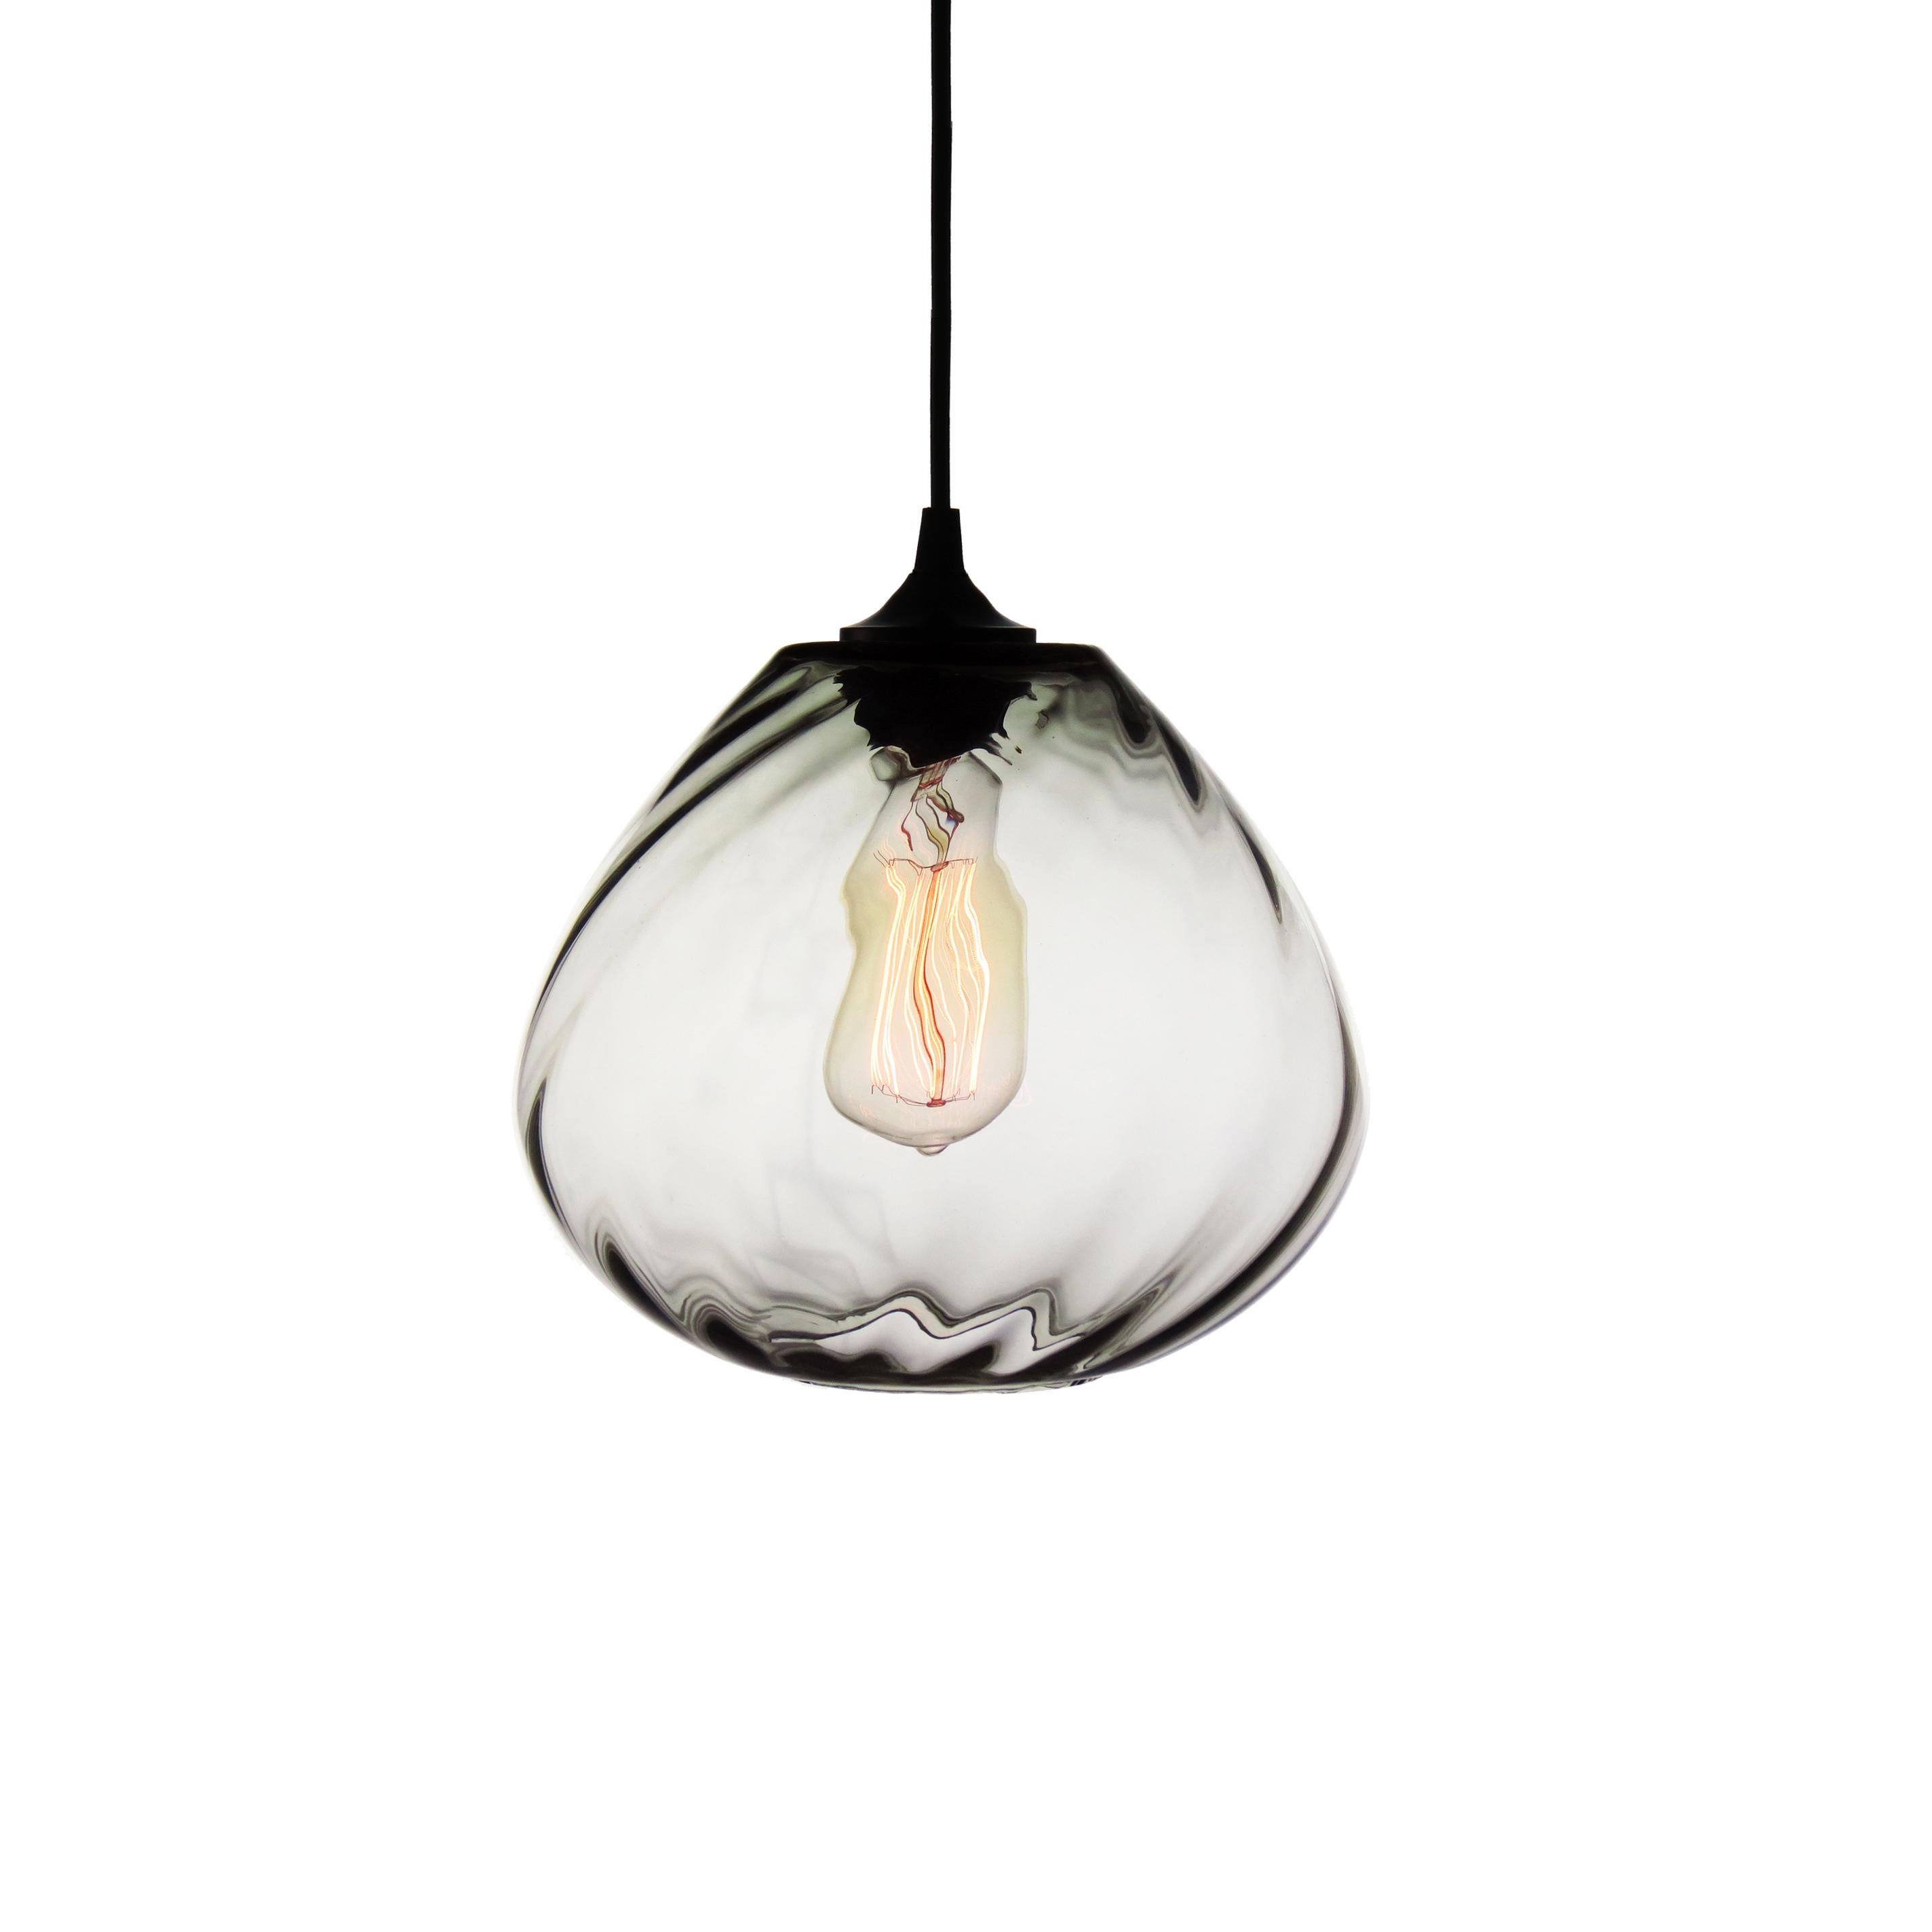 Hand-Crafted Golden Olive Modern Transparent Hand Blown Glass Architectural Pendant Lamp For Sale